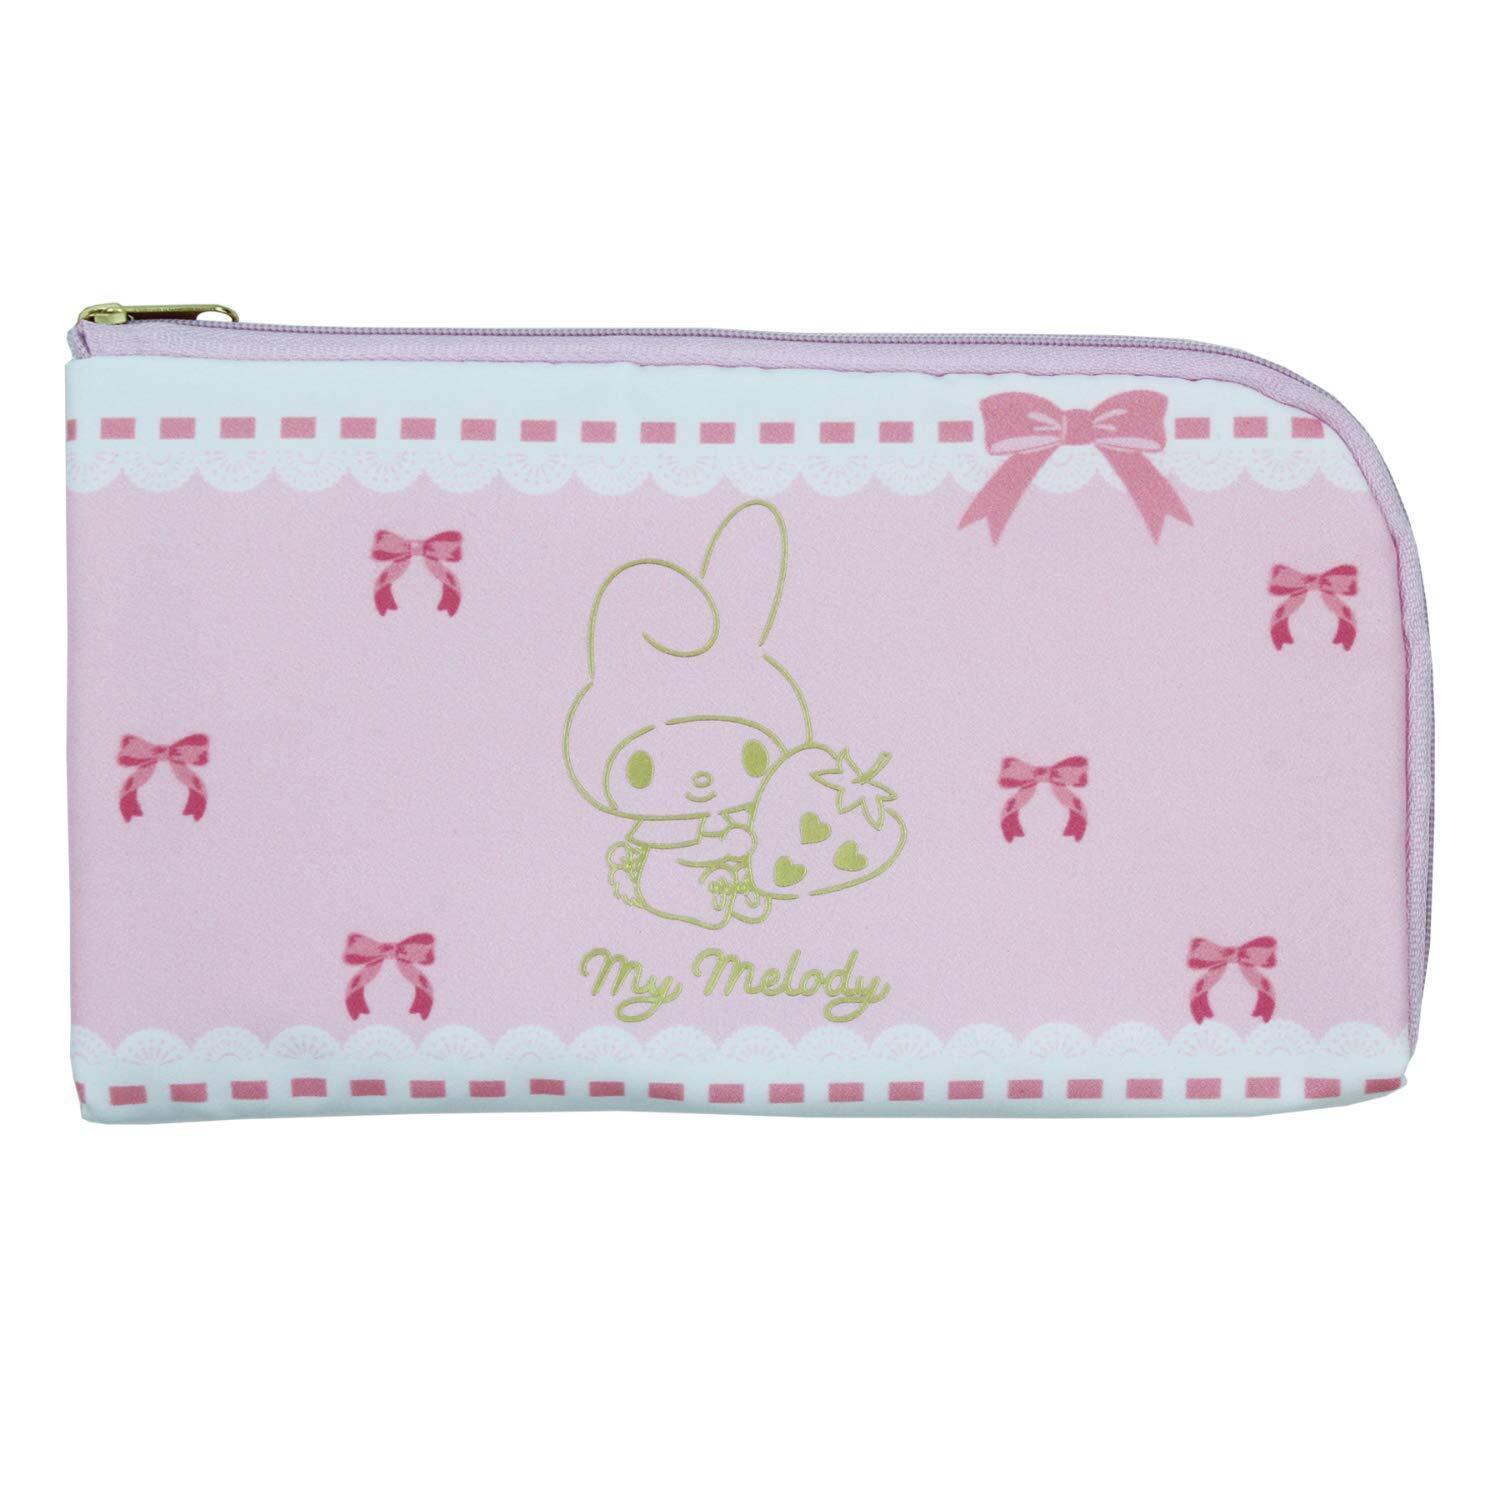 Yasuda Trading Antibacterial and deodorizing mask pouch my melody